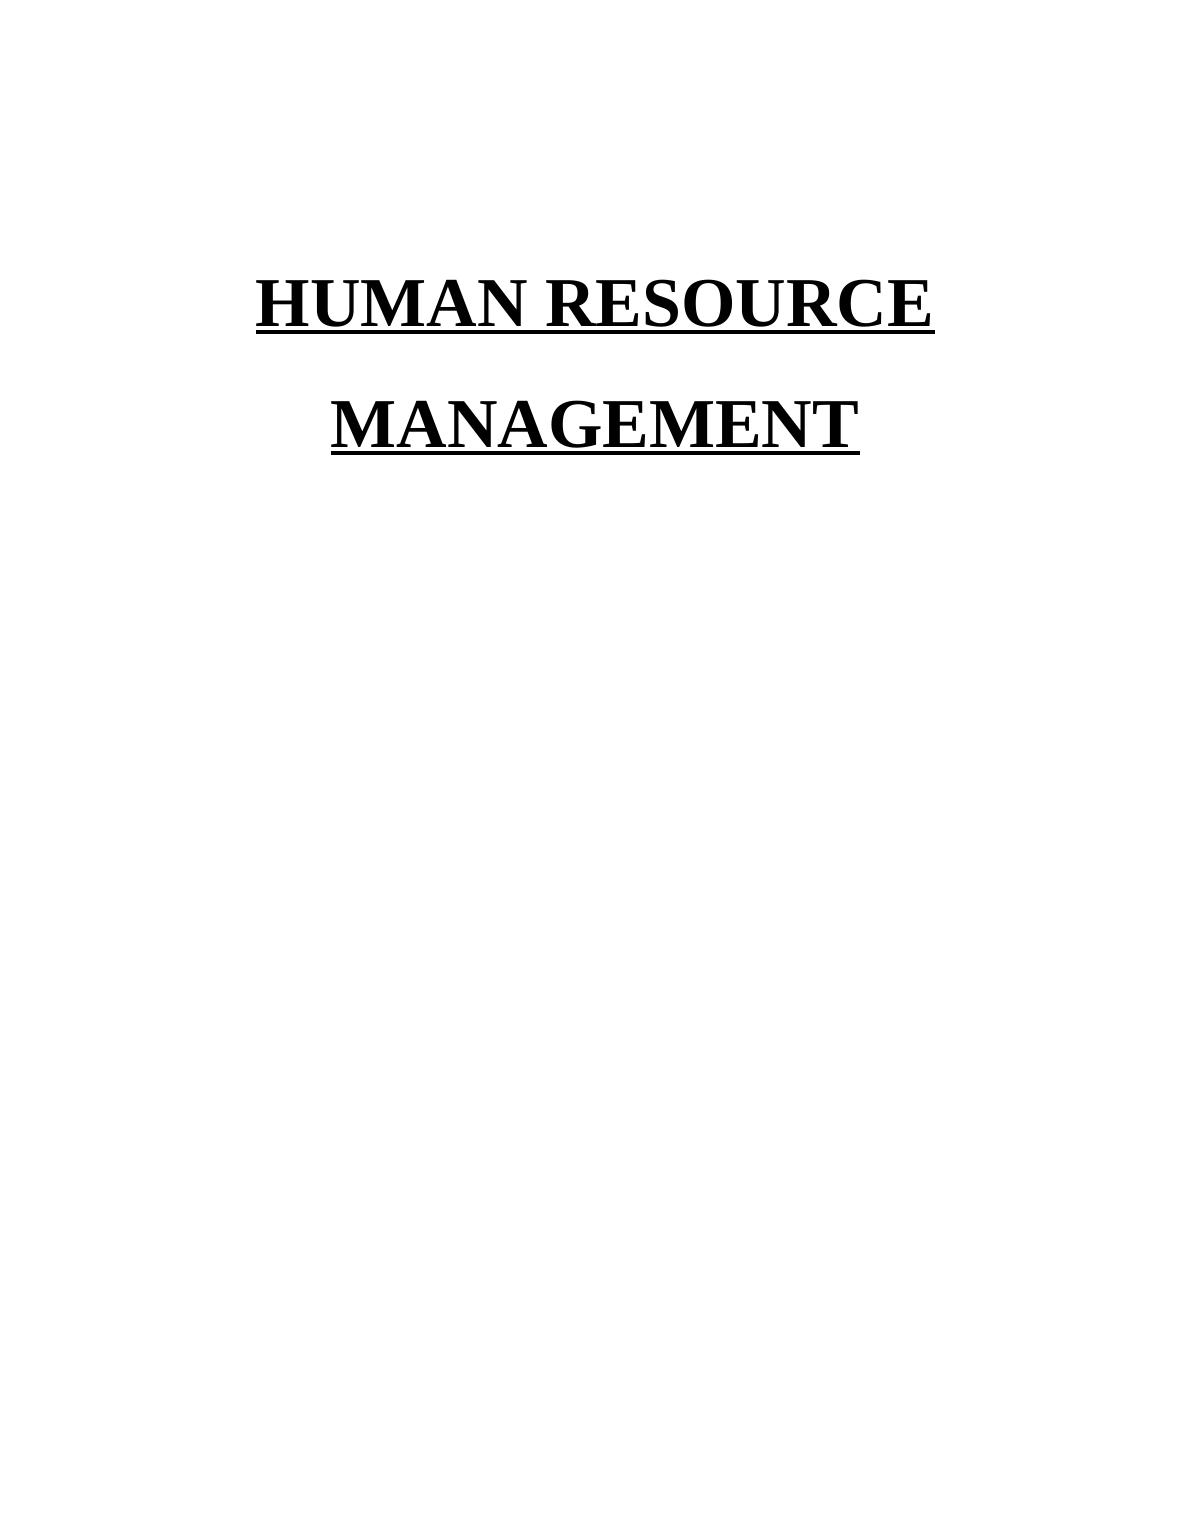 Human Resource Management in Arcadia Group_1